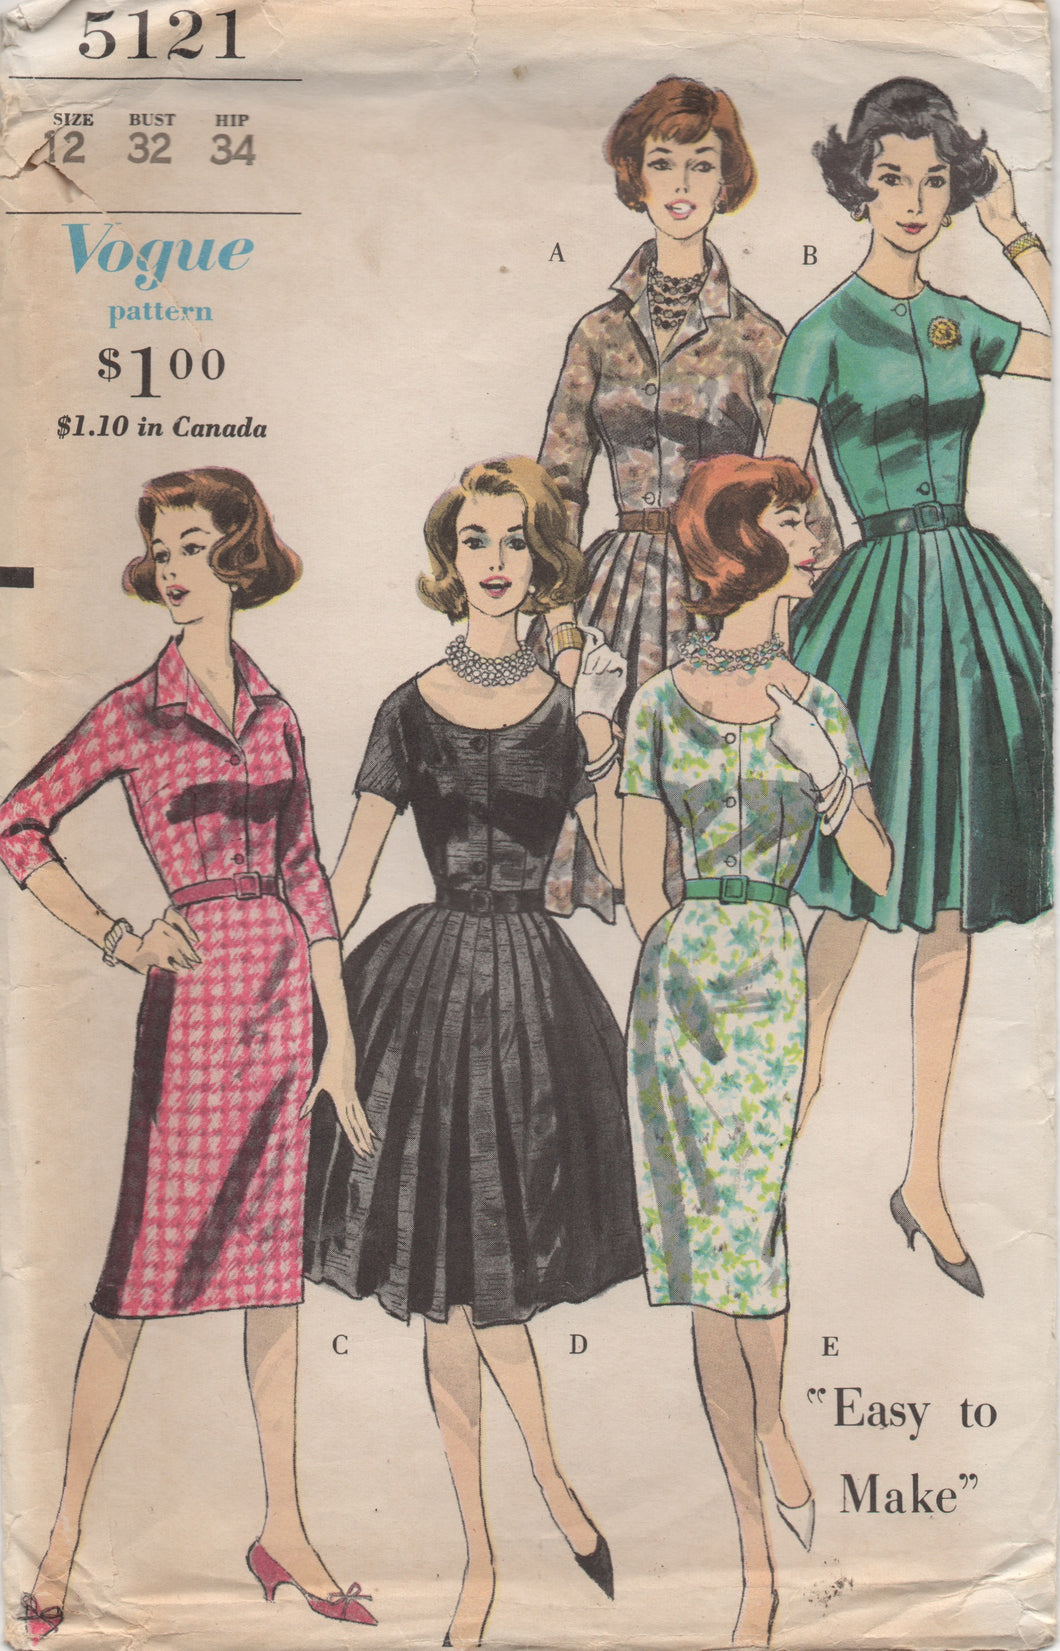 1960's Vogue Shirtwaist Dress with Pleated or Sheath Skirt and 5 Necklines - Bust 32